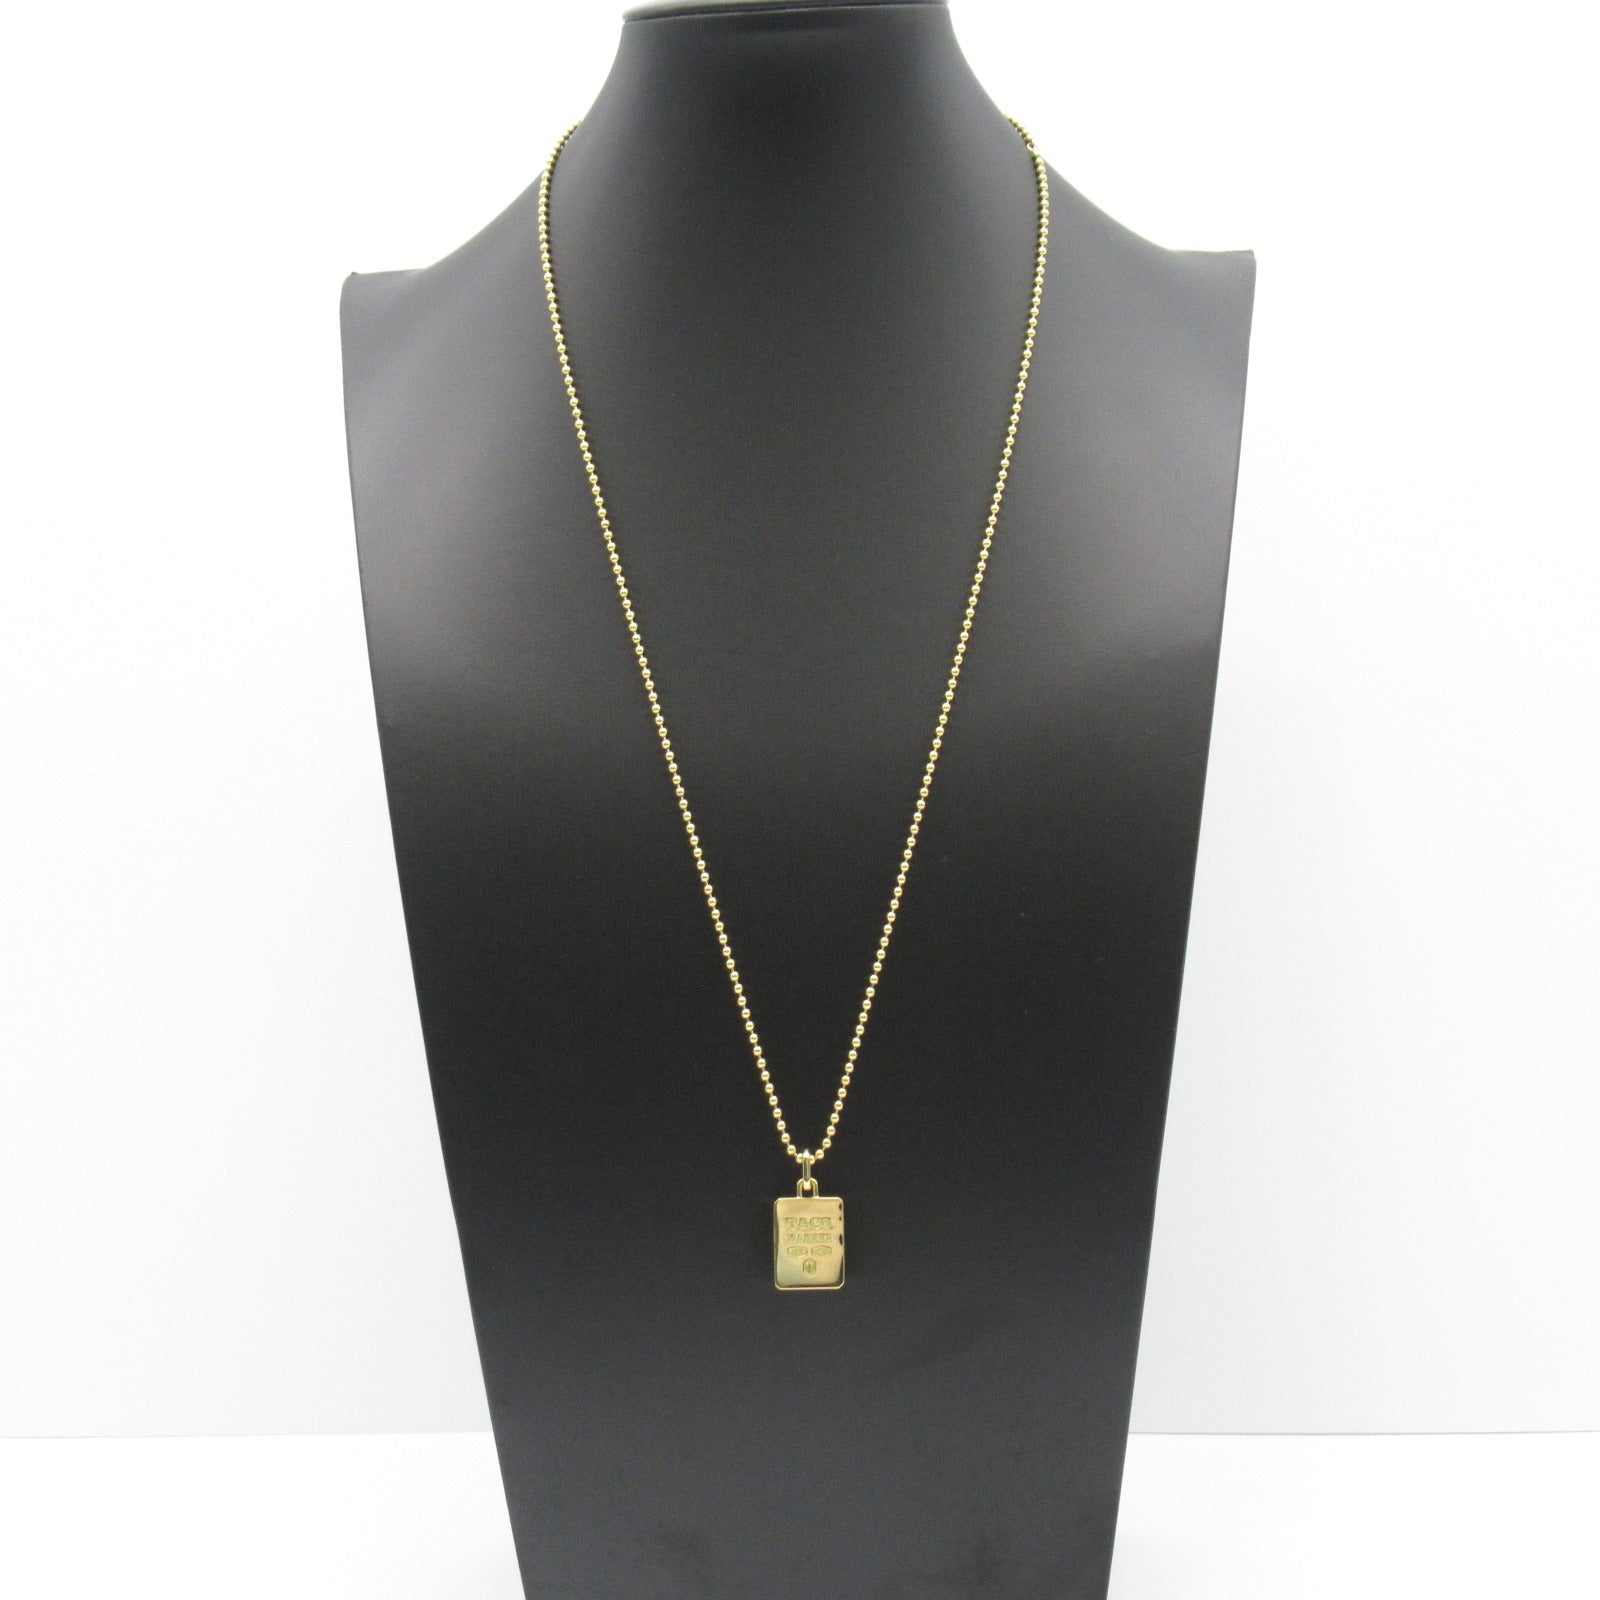 Tiffany TIFFANY&amp;CO manufacturers square necklace necklace jewelry K18 (yellow g) men ladies gold